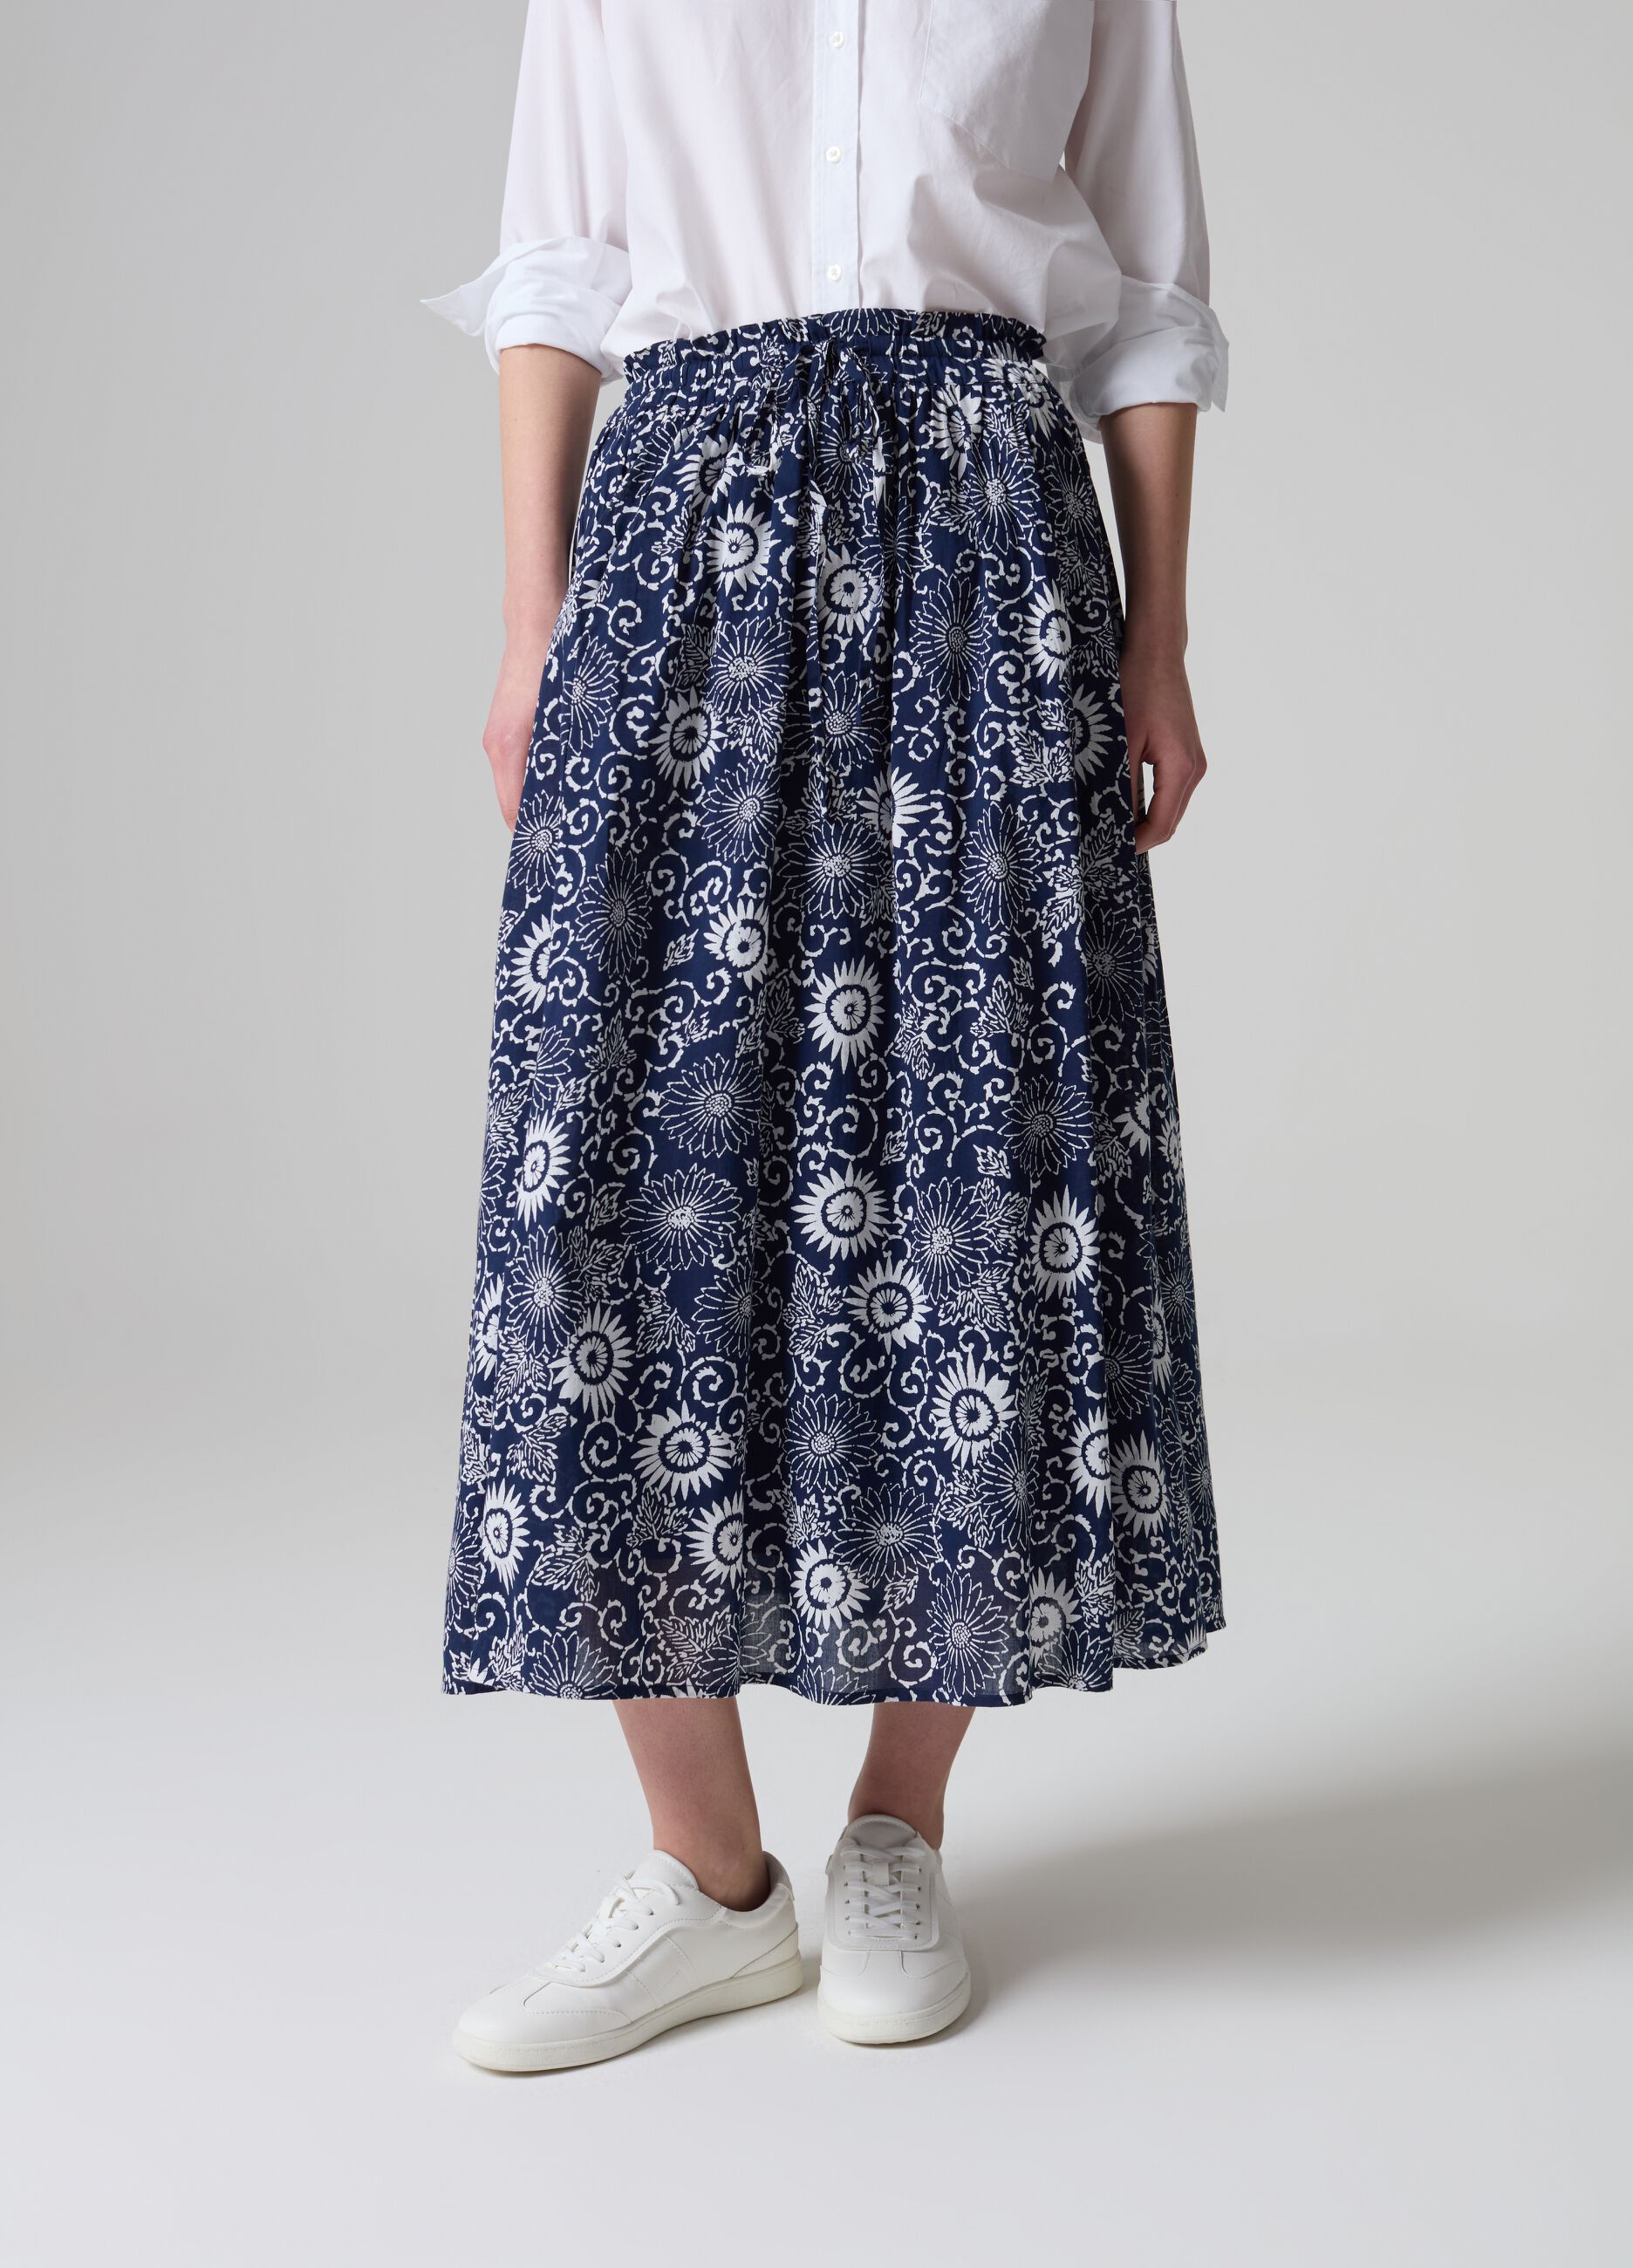 Full midi skirt with floral print